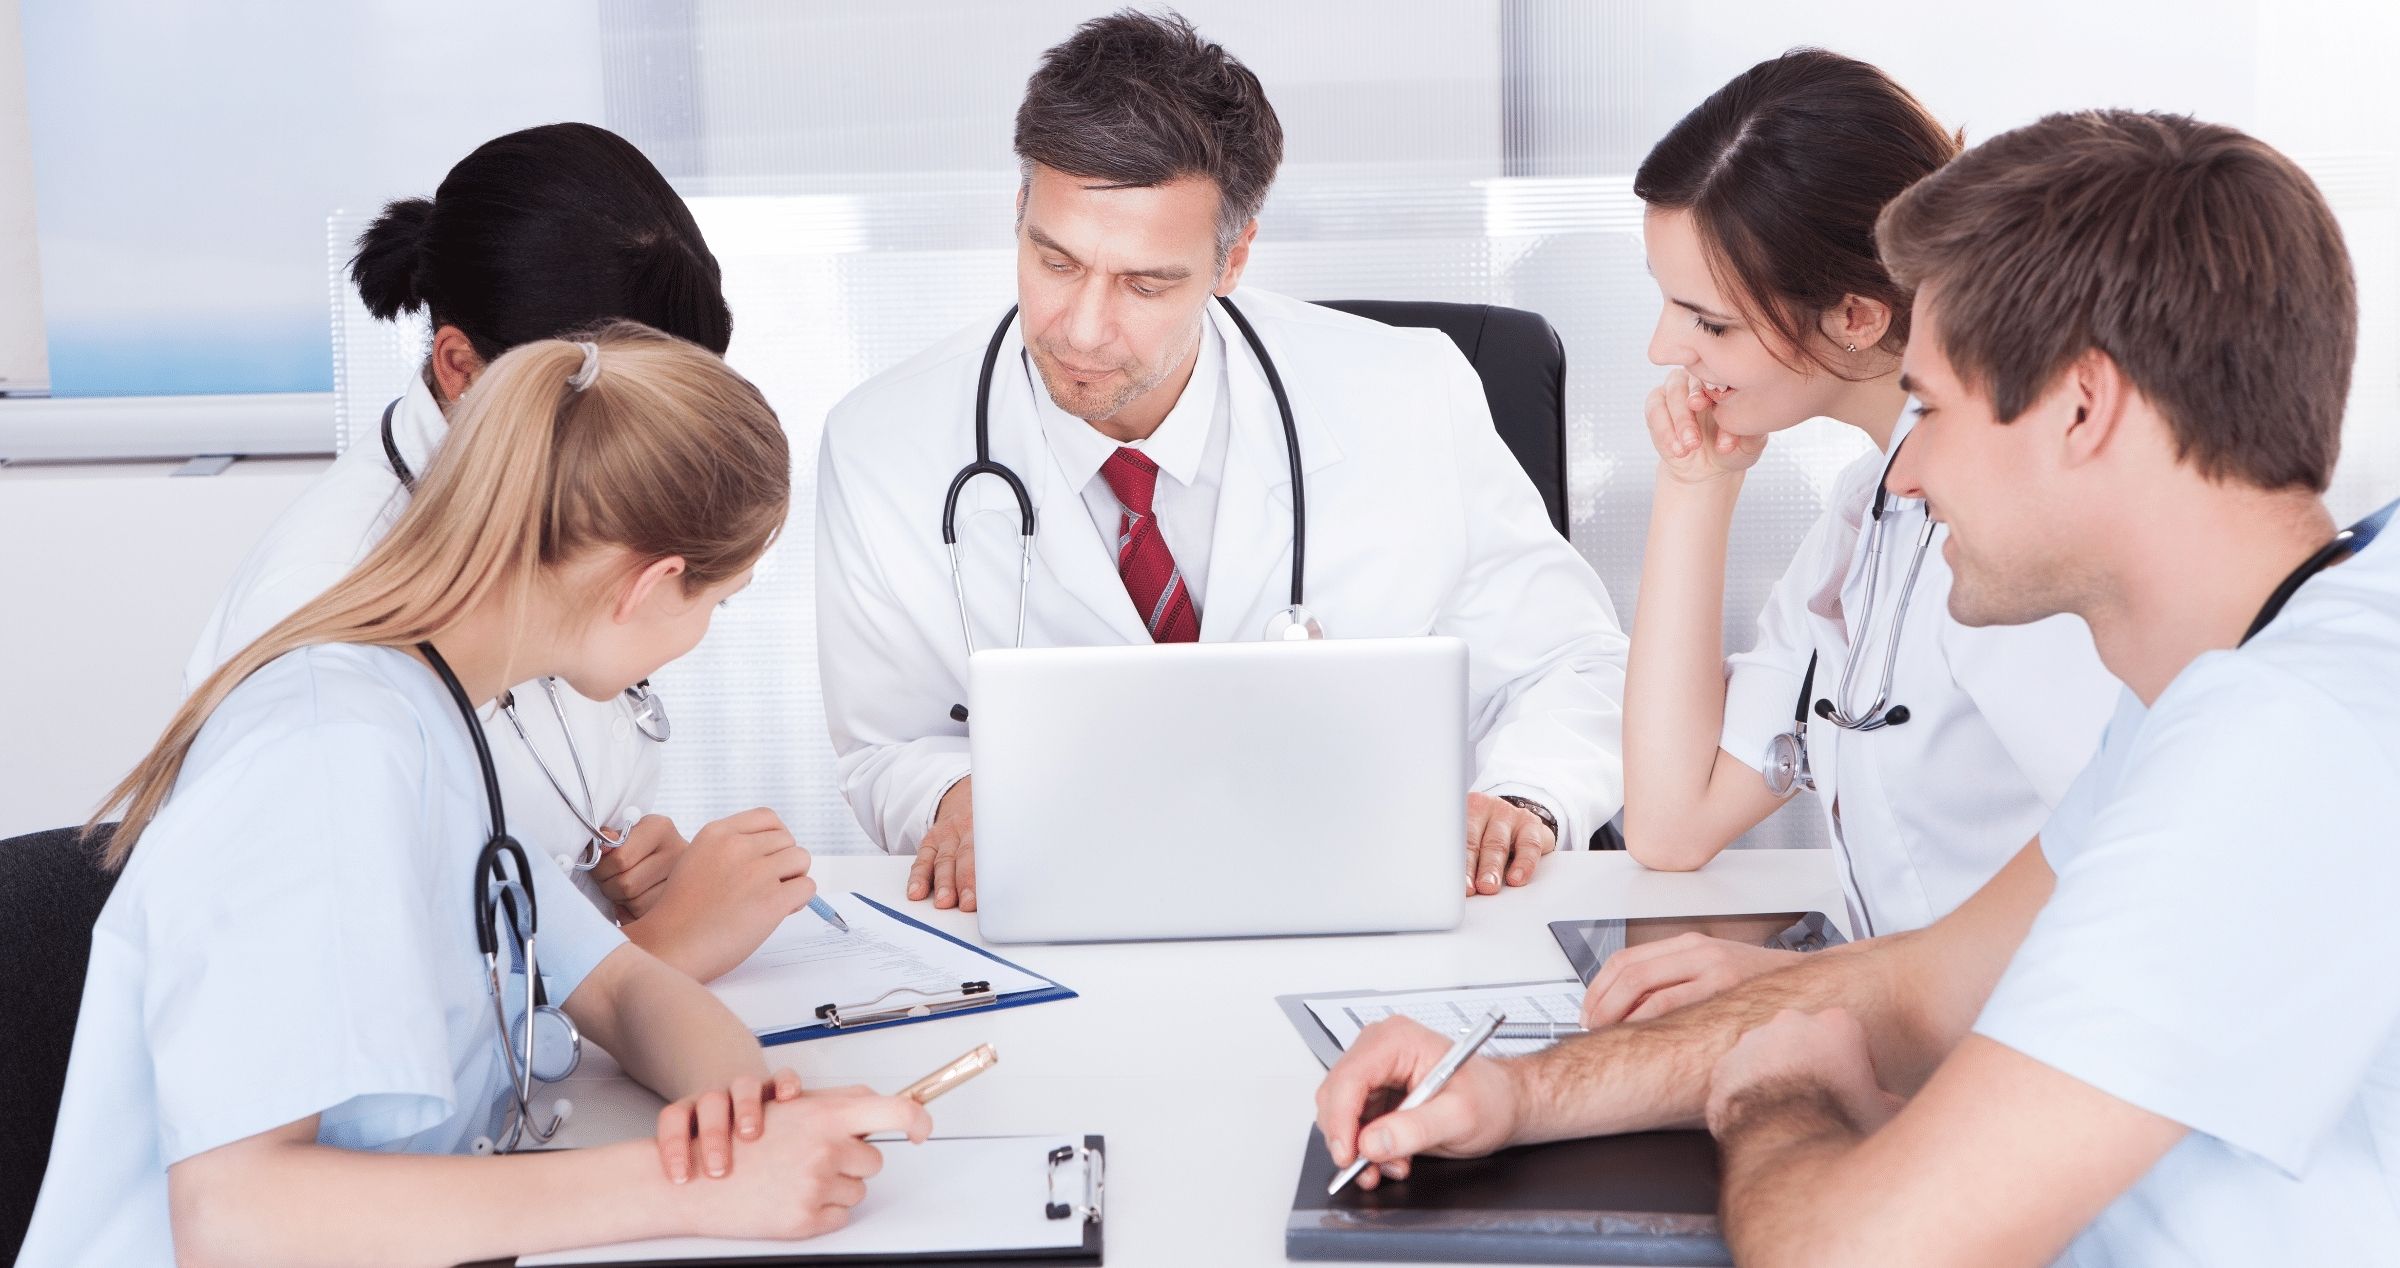 Group of health care students sitting at desk having meeting